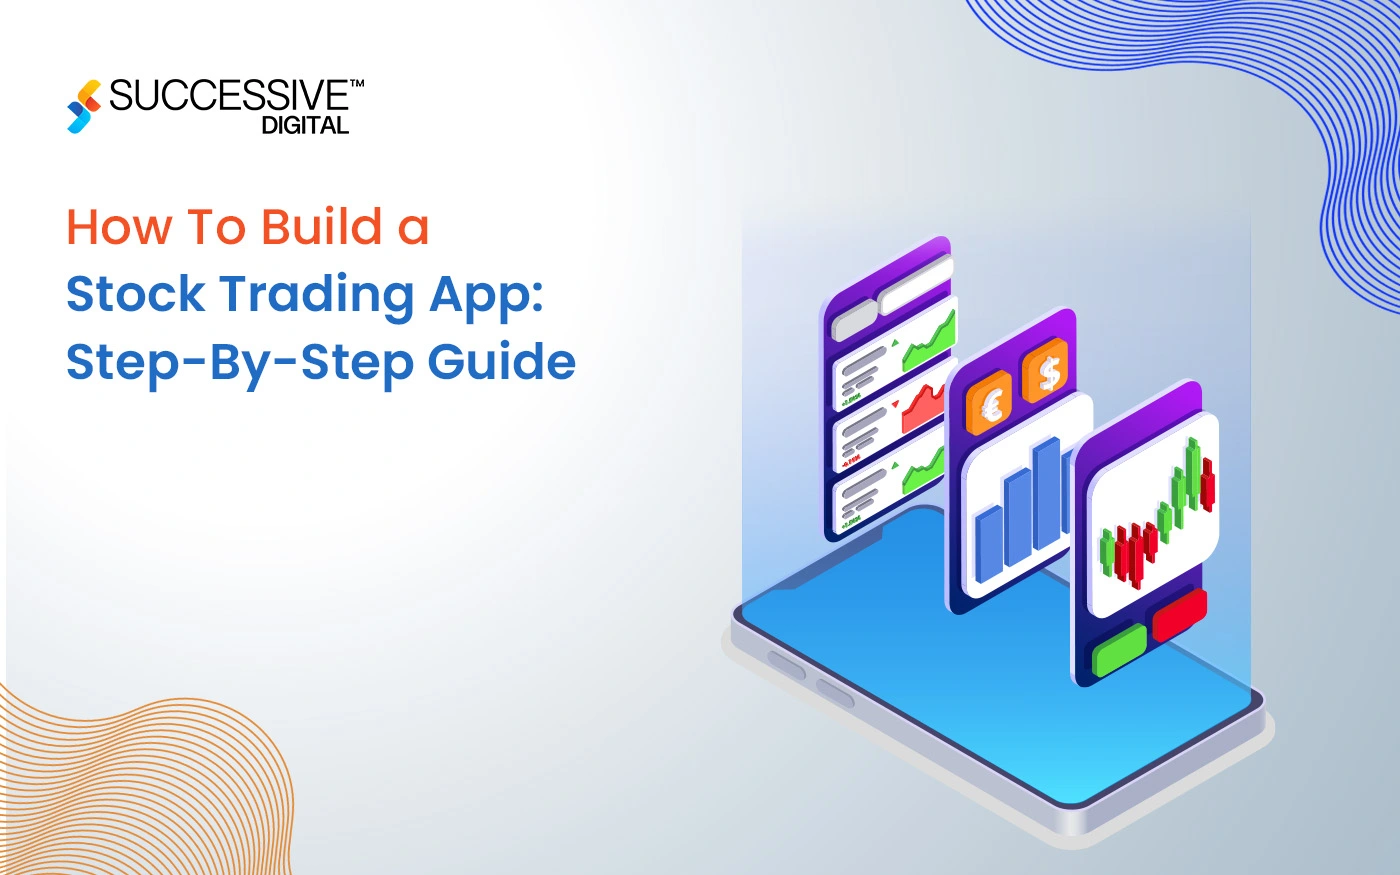 How To Build a Stock Trading App: Step-By-Step Guide